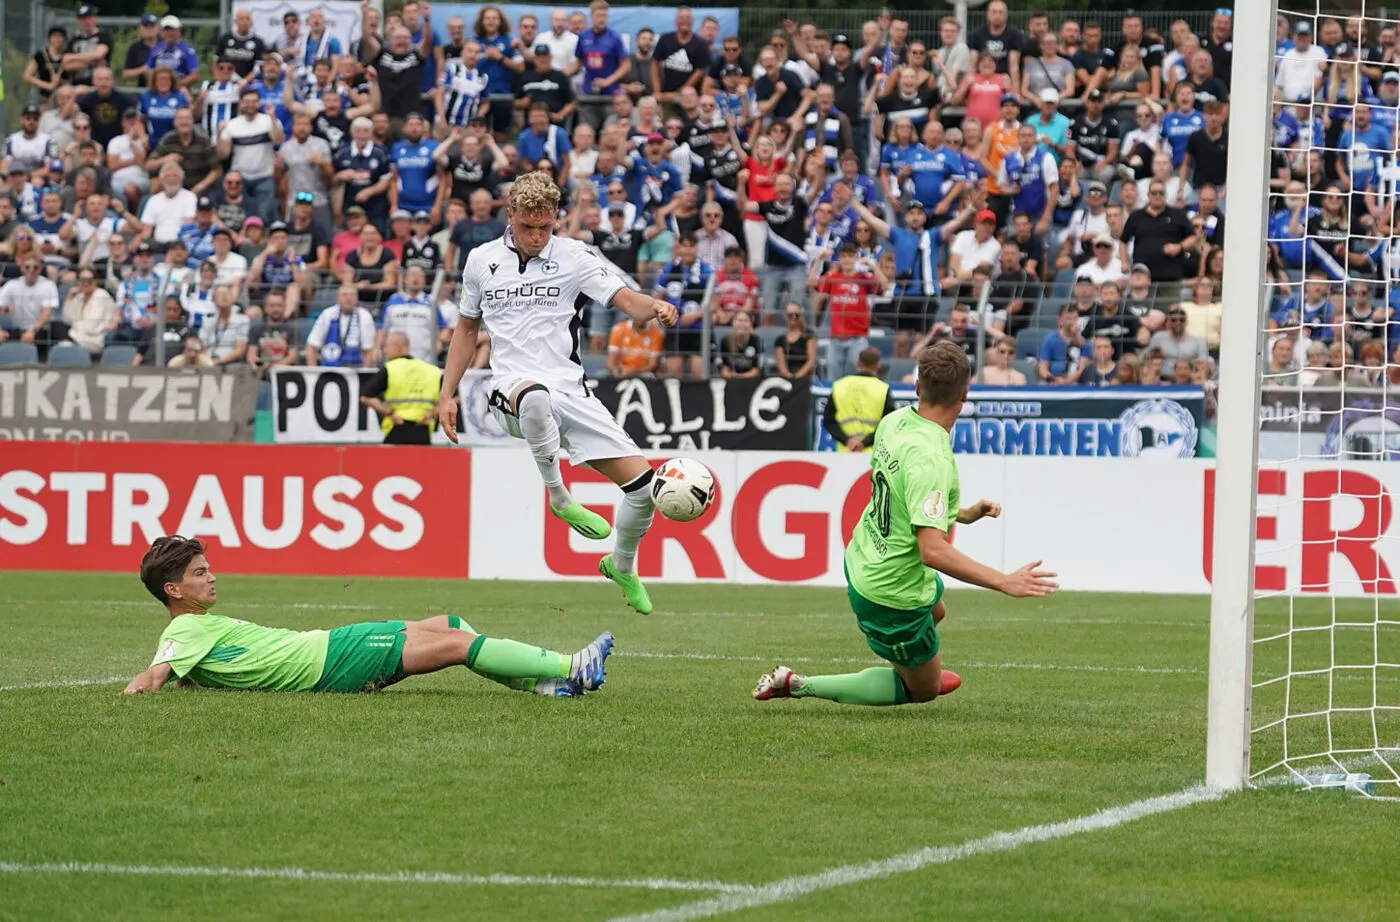 31 July 2022, Rhineland-Palatinate, Koblenz: Soccer, DFB Cup, FV Engers - Arminia Bielefeld, 1st round, Stadion Oberwerth. Robin Hack (M) of Bielefeld scores the goal to 1:7 next to Lukas Klappert (l) and Yannik Finkenbusch of Engers. Photo: Hasan Bratic/dpa - IMPORTANT NOTE: In accordance with the requirements of the DFL Deutsche Fußball Liga and the DFB Deutscher Fußball-Bund, it is prohibited to use or have used photographs taken in the stadium and/or of the match in the form of sequence pictures and/or video-like photo series. - Photo by Icon sport